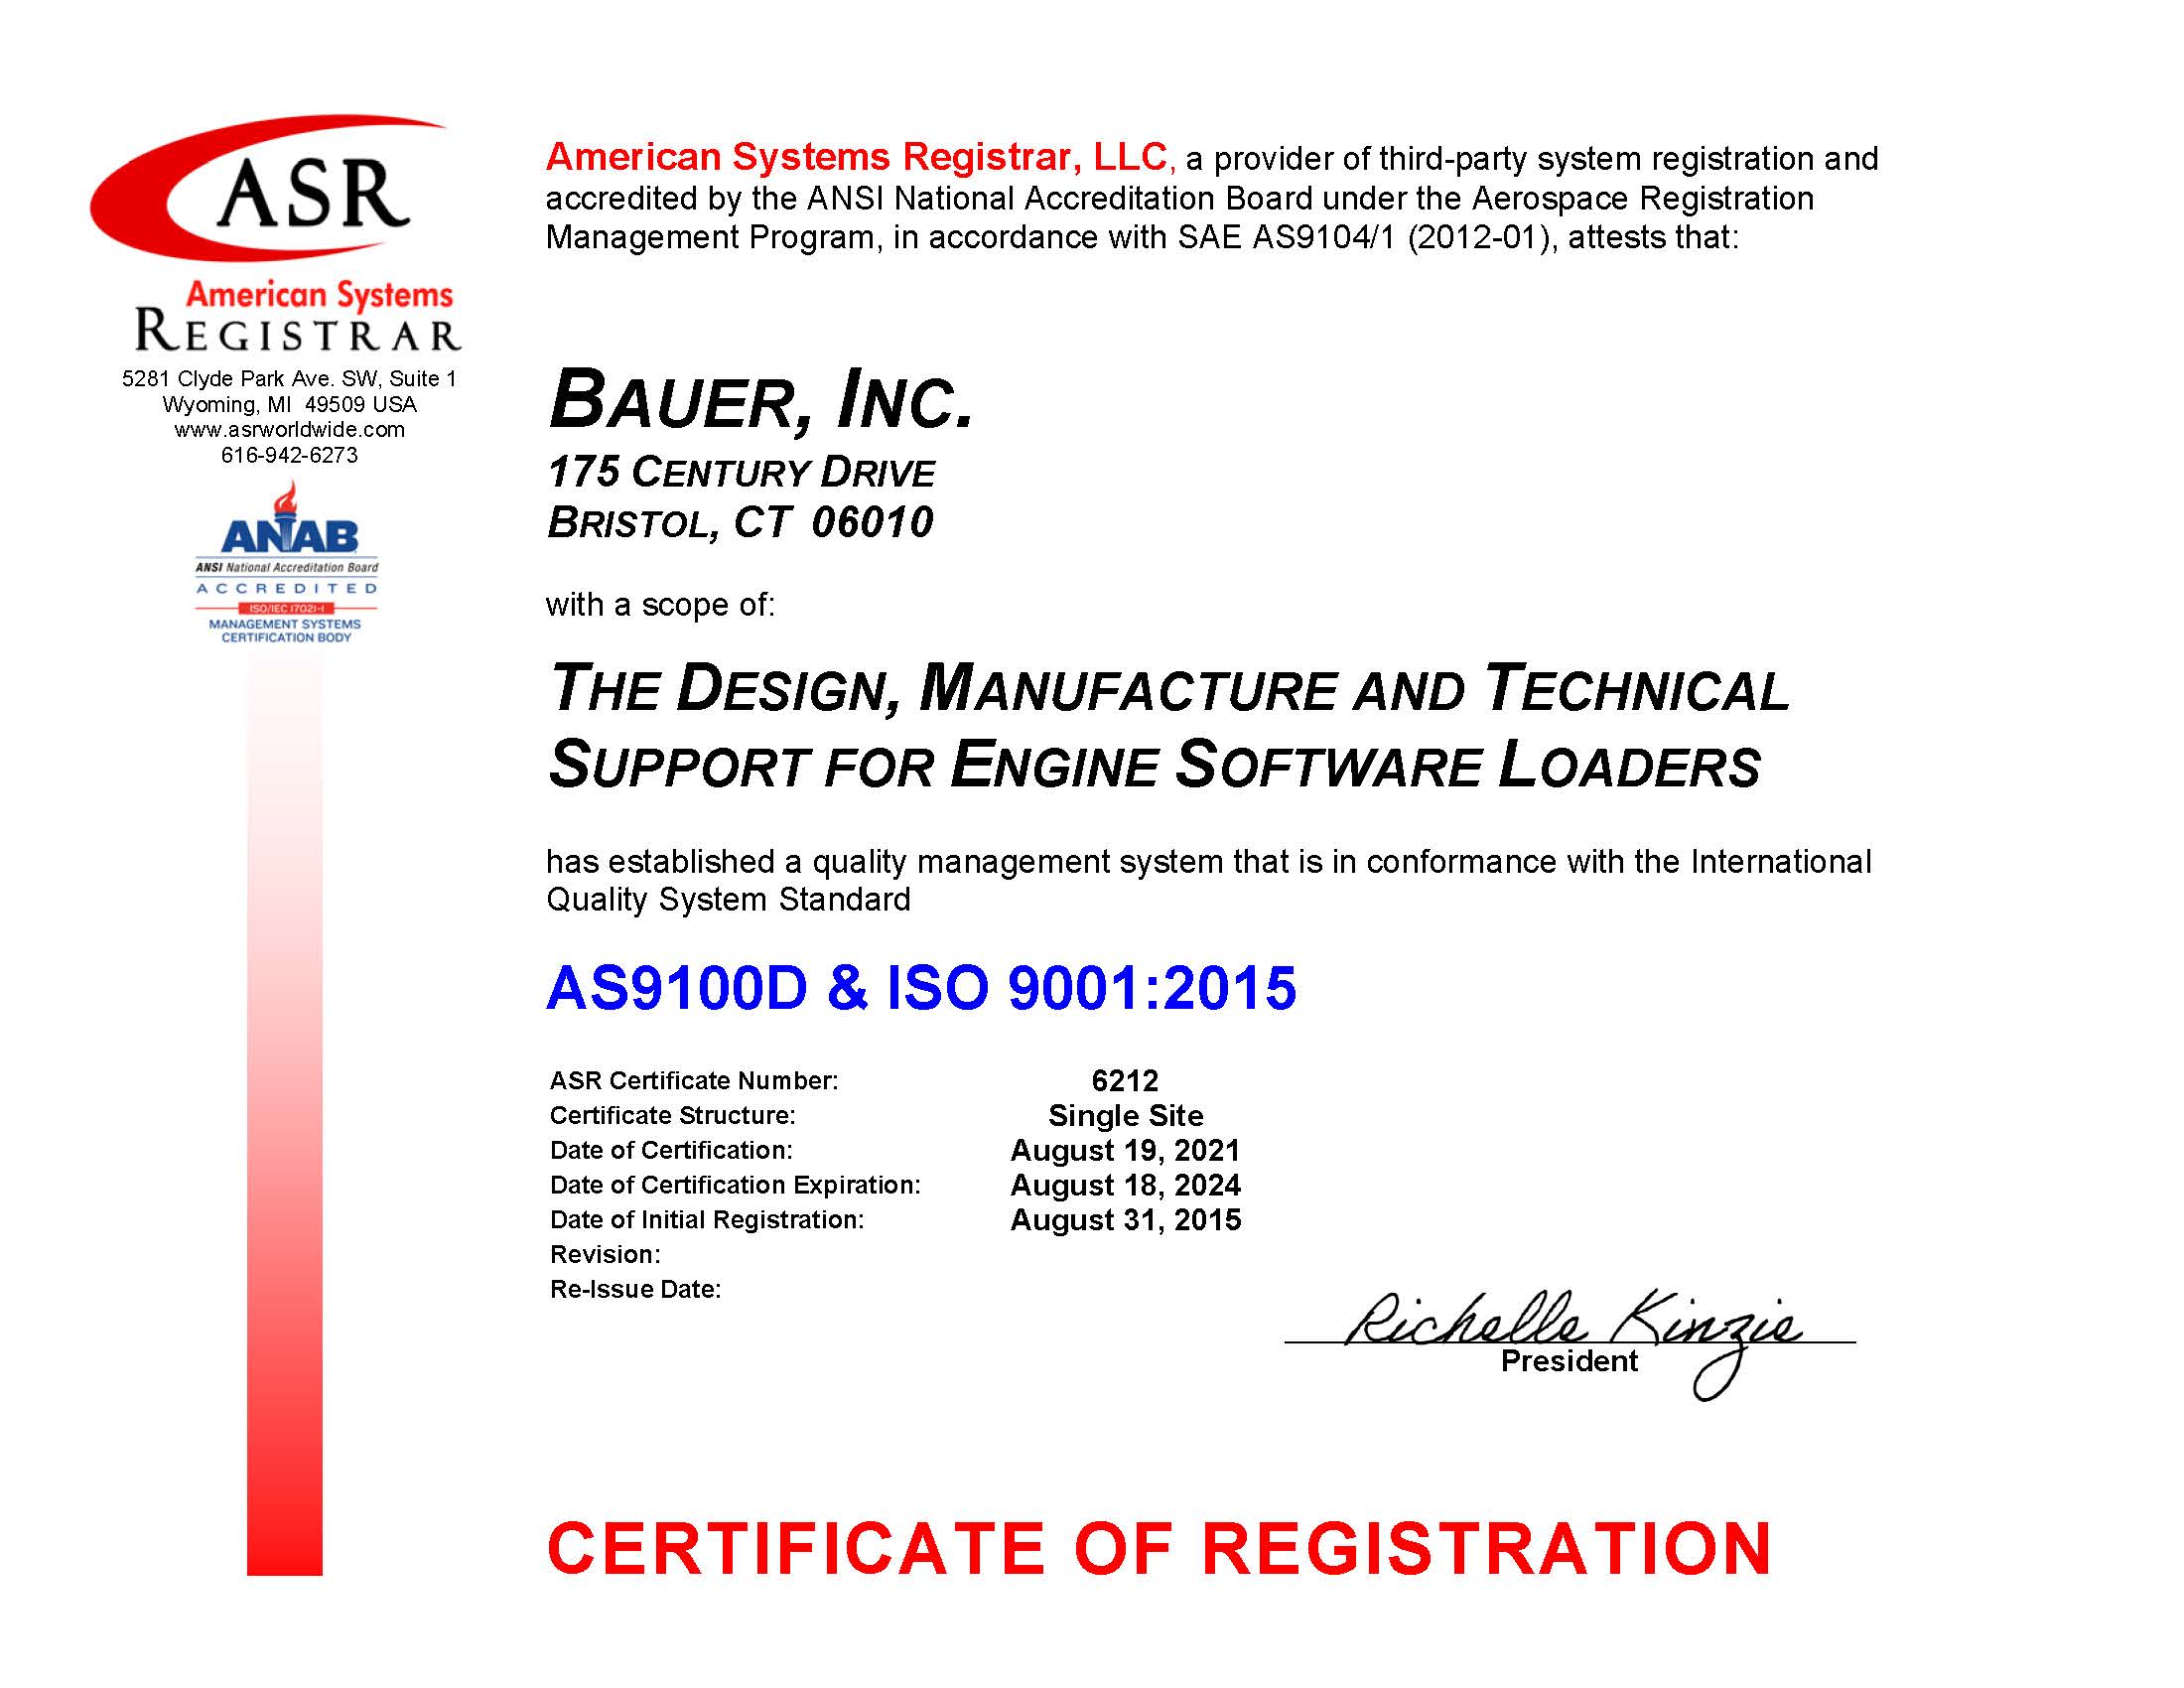 Bauer AS9100 Certificate Aug 2021 signed